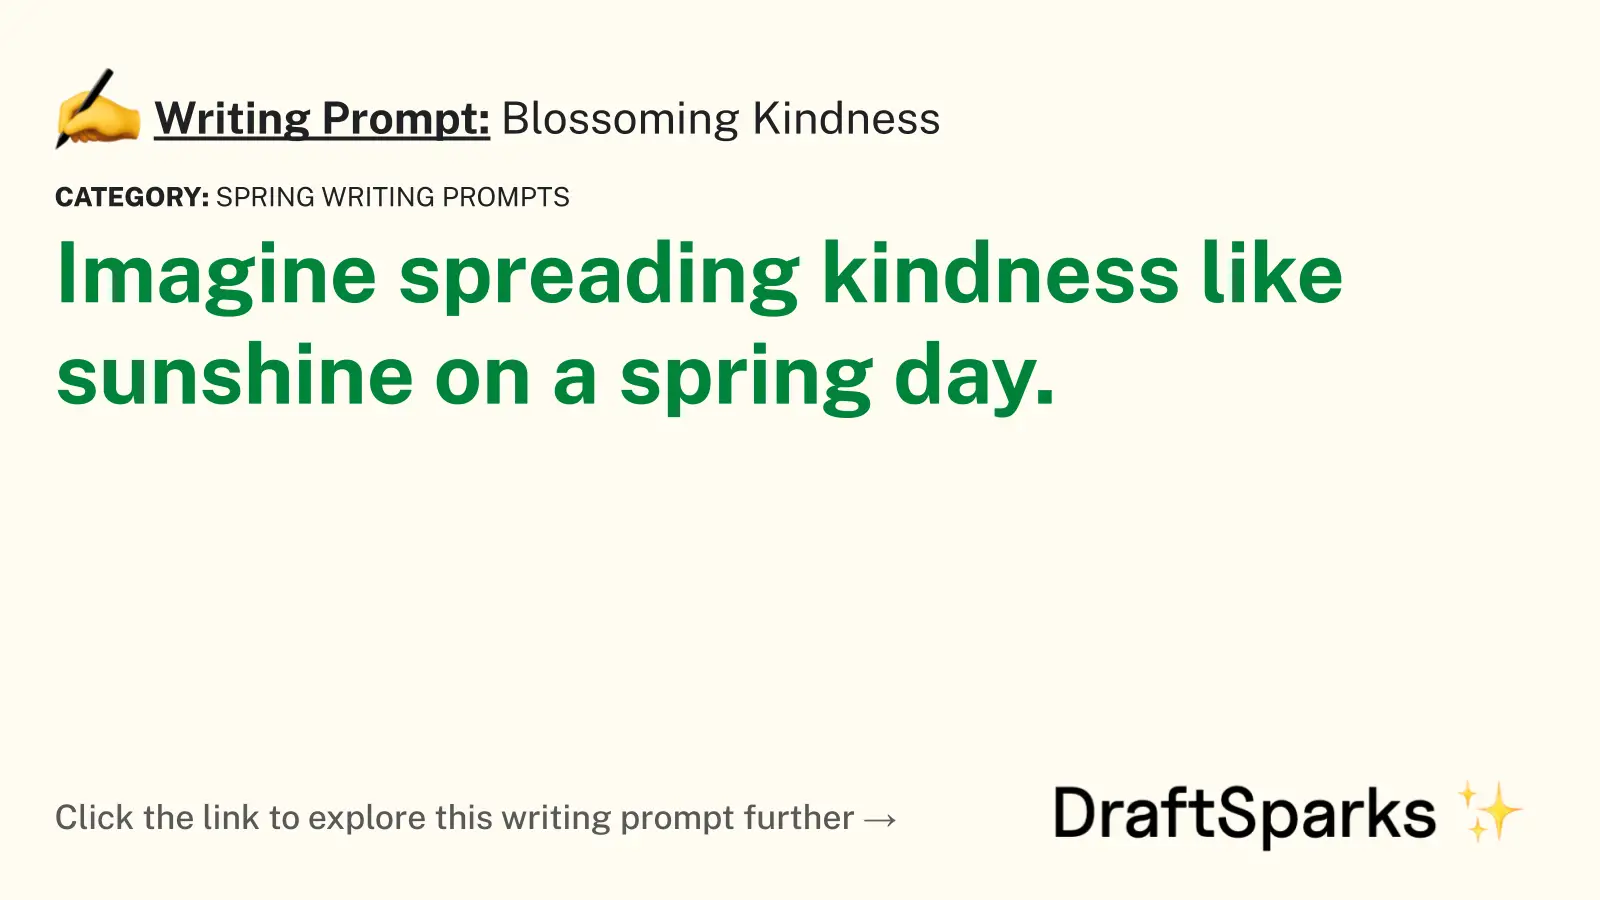 Blossoming Kindness